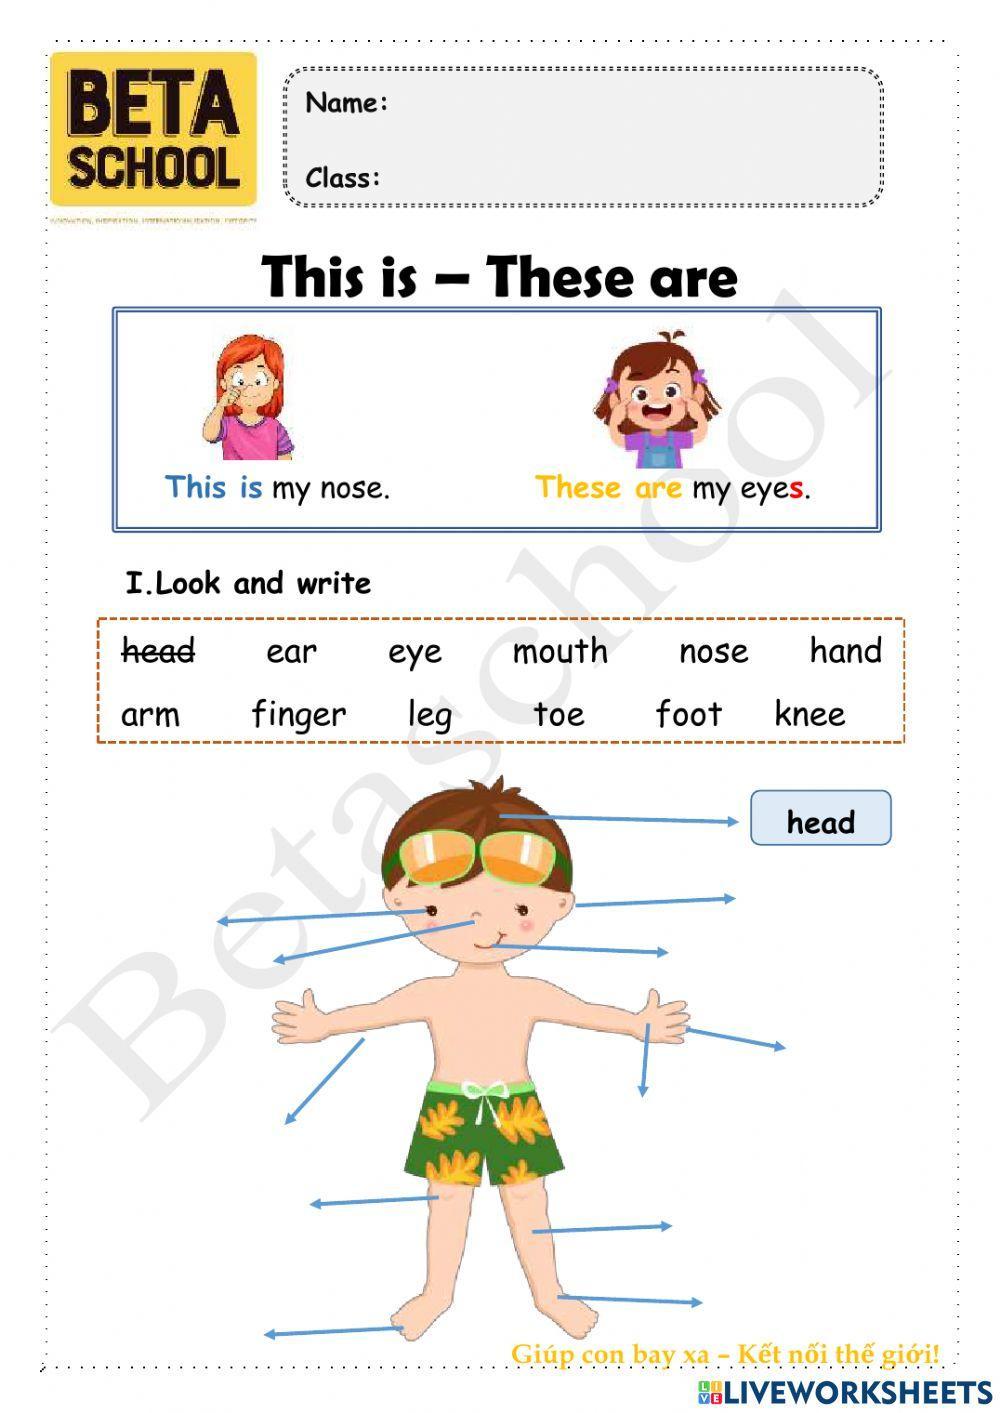 1A - Body parts This is-These are - TOPIC 1